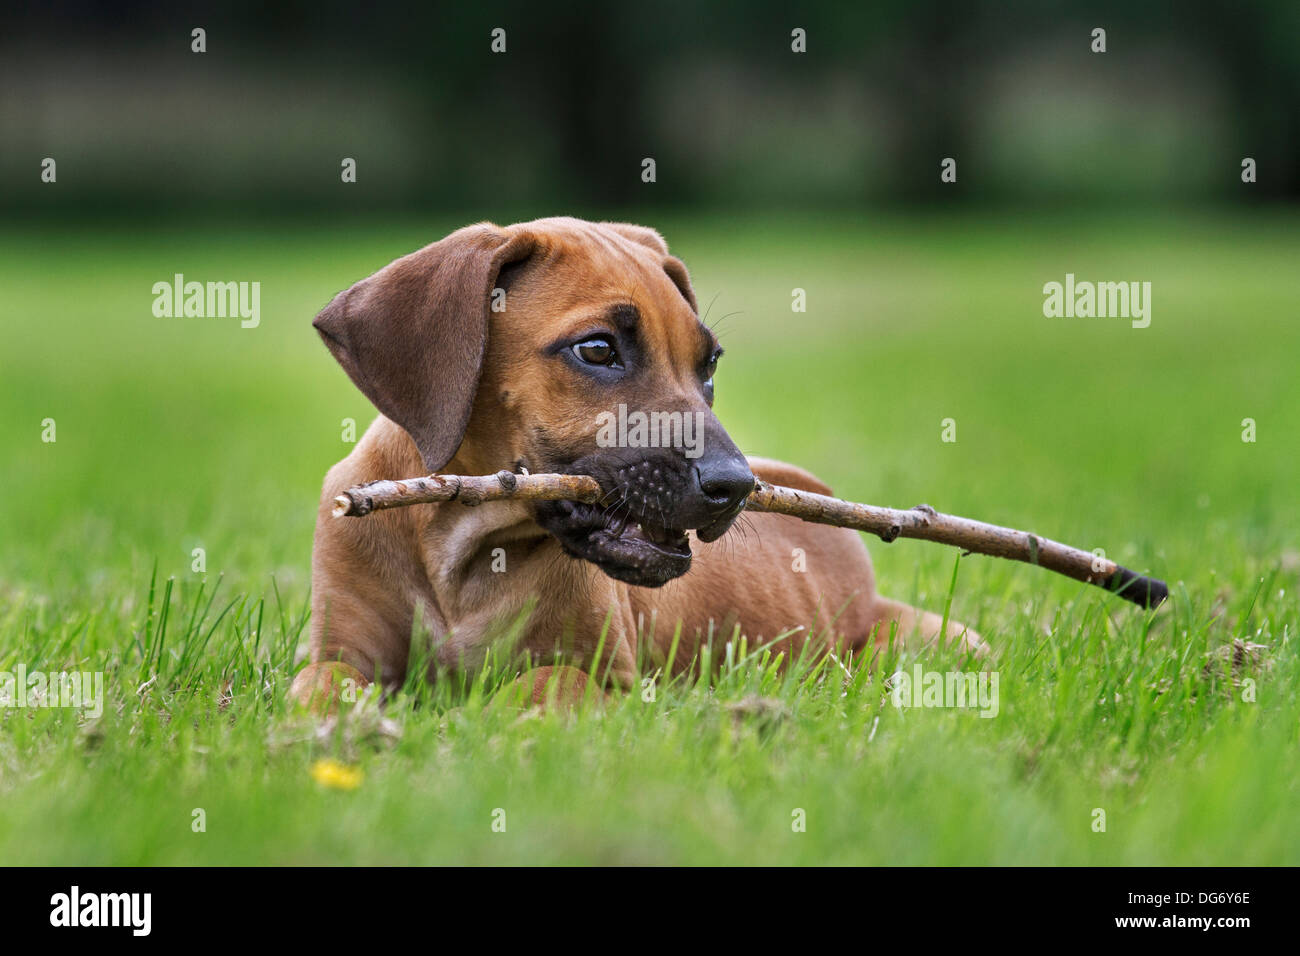 Rhodesian Ridgeback / African Lion Hound (Canis lupus familiaris) pup playing with twig in garden Stock Photo